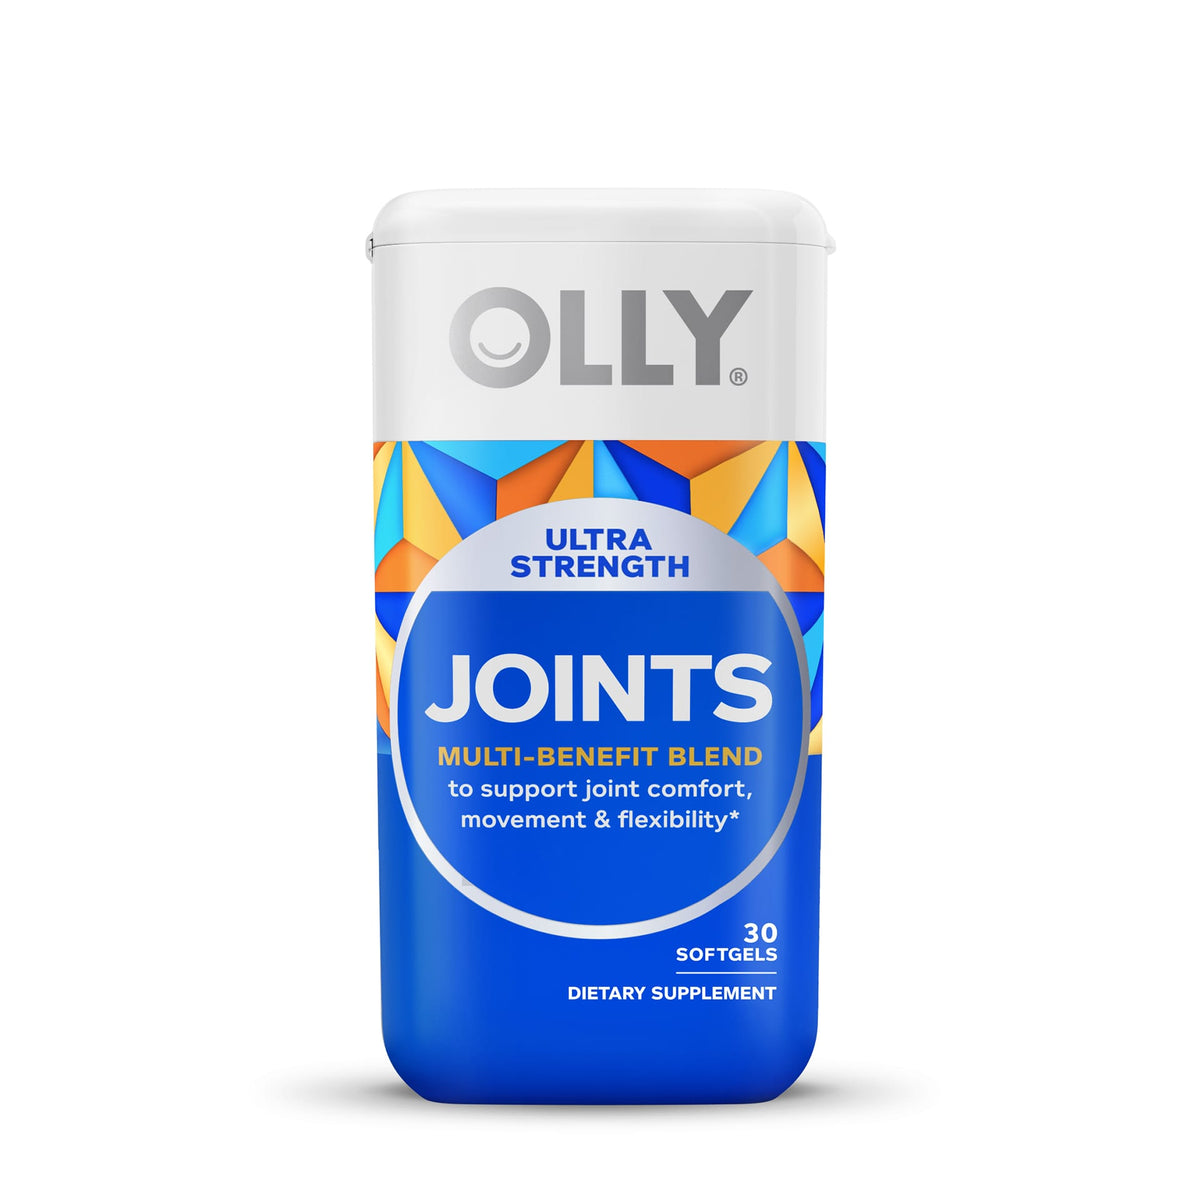 Ultra Strength Joints Softgels Image